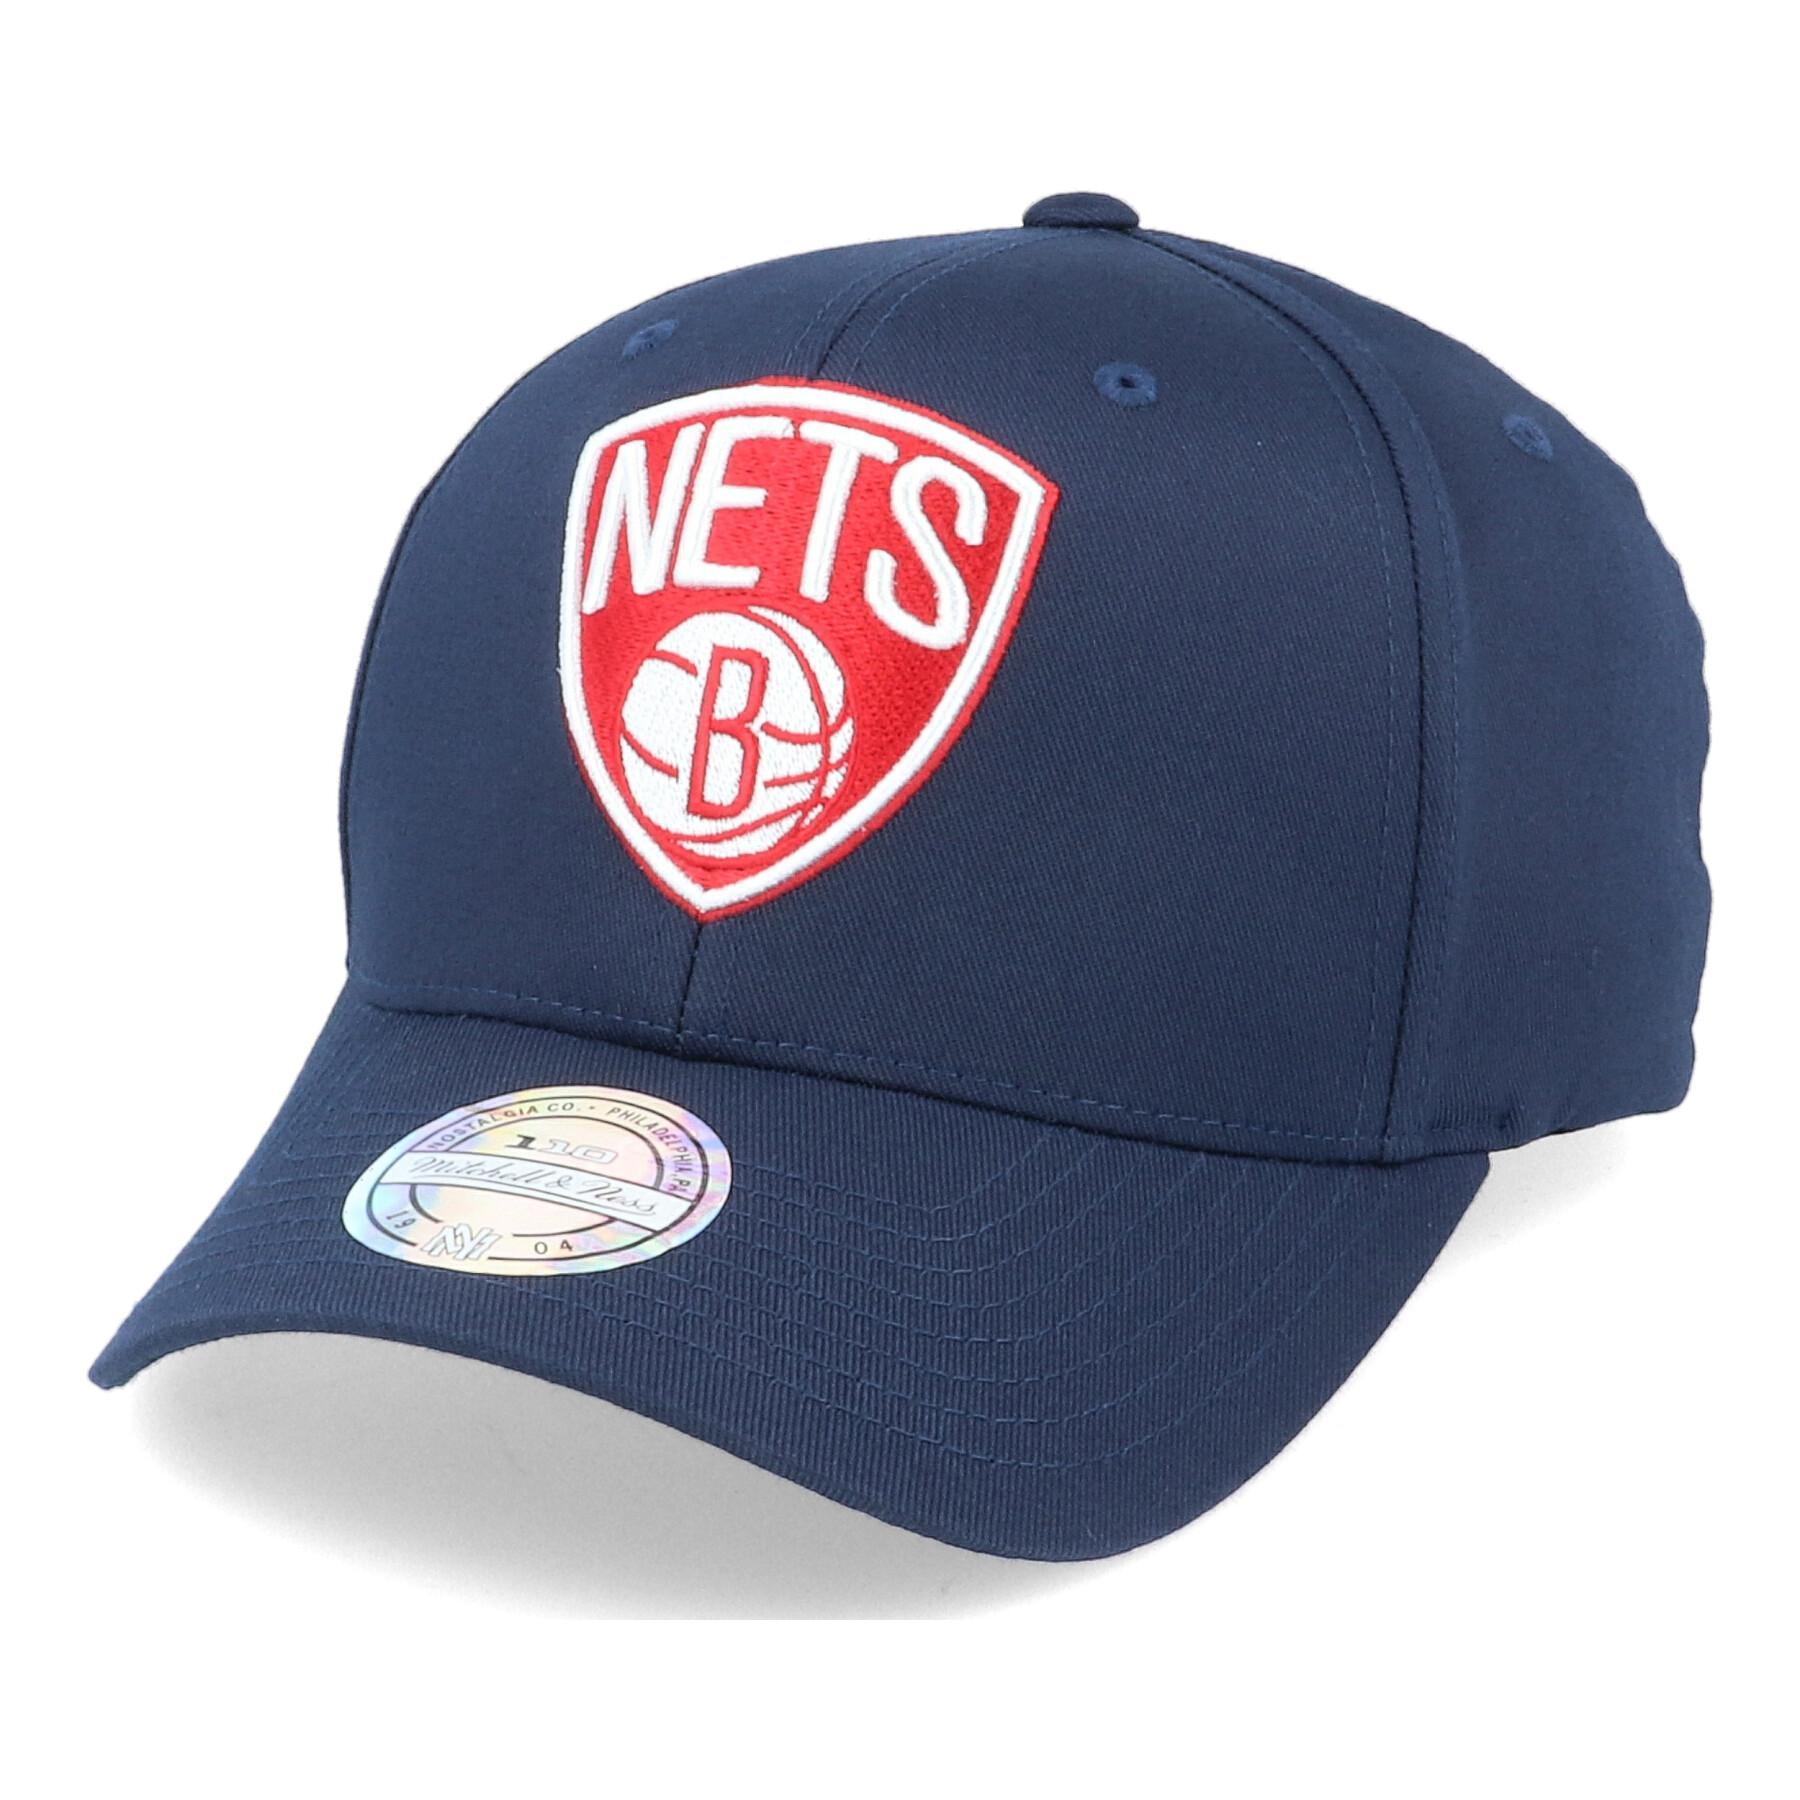 Casquette Brooklyn Nets navy/red/white 110